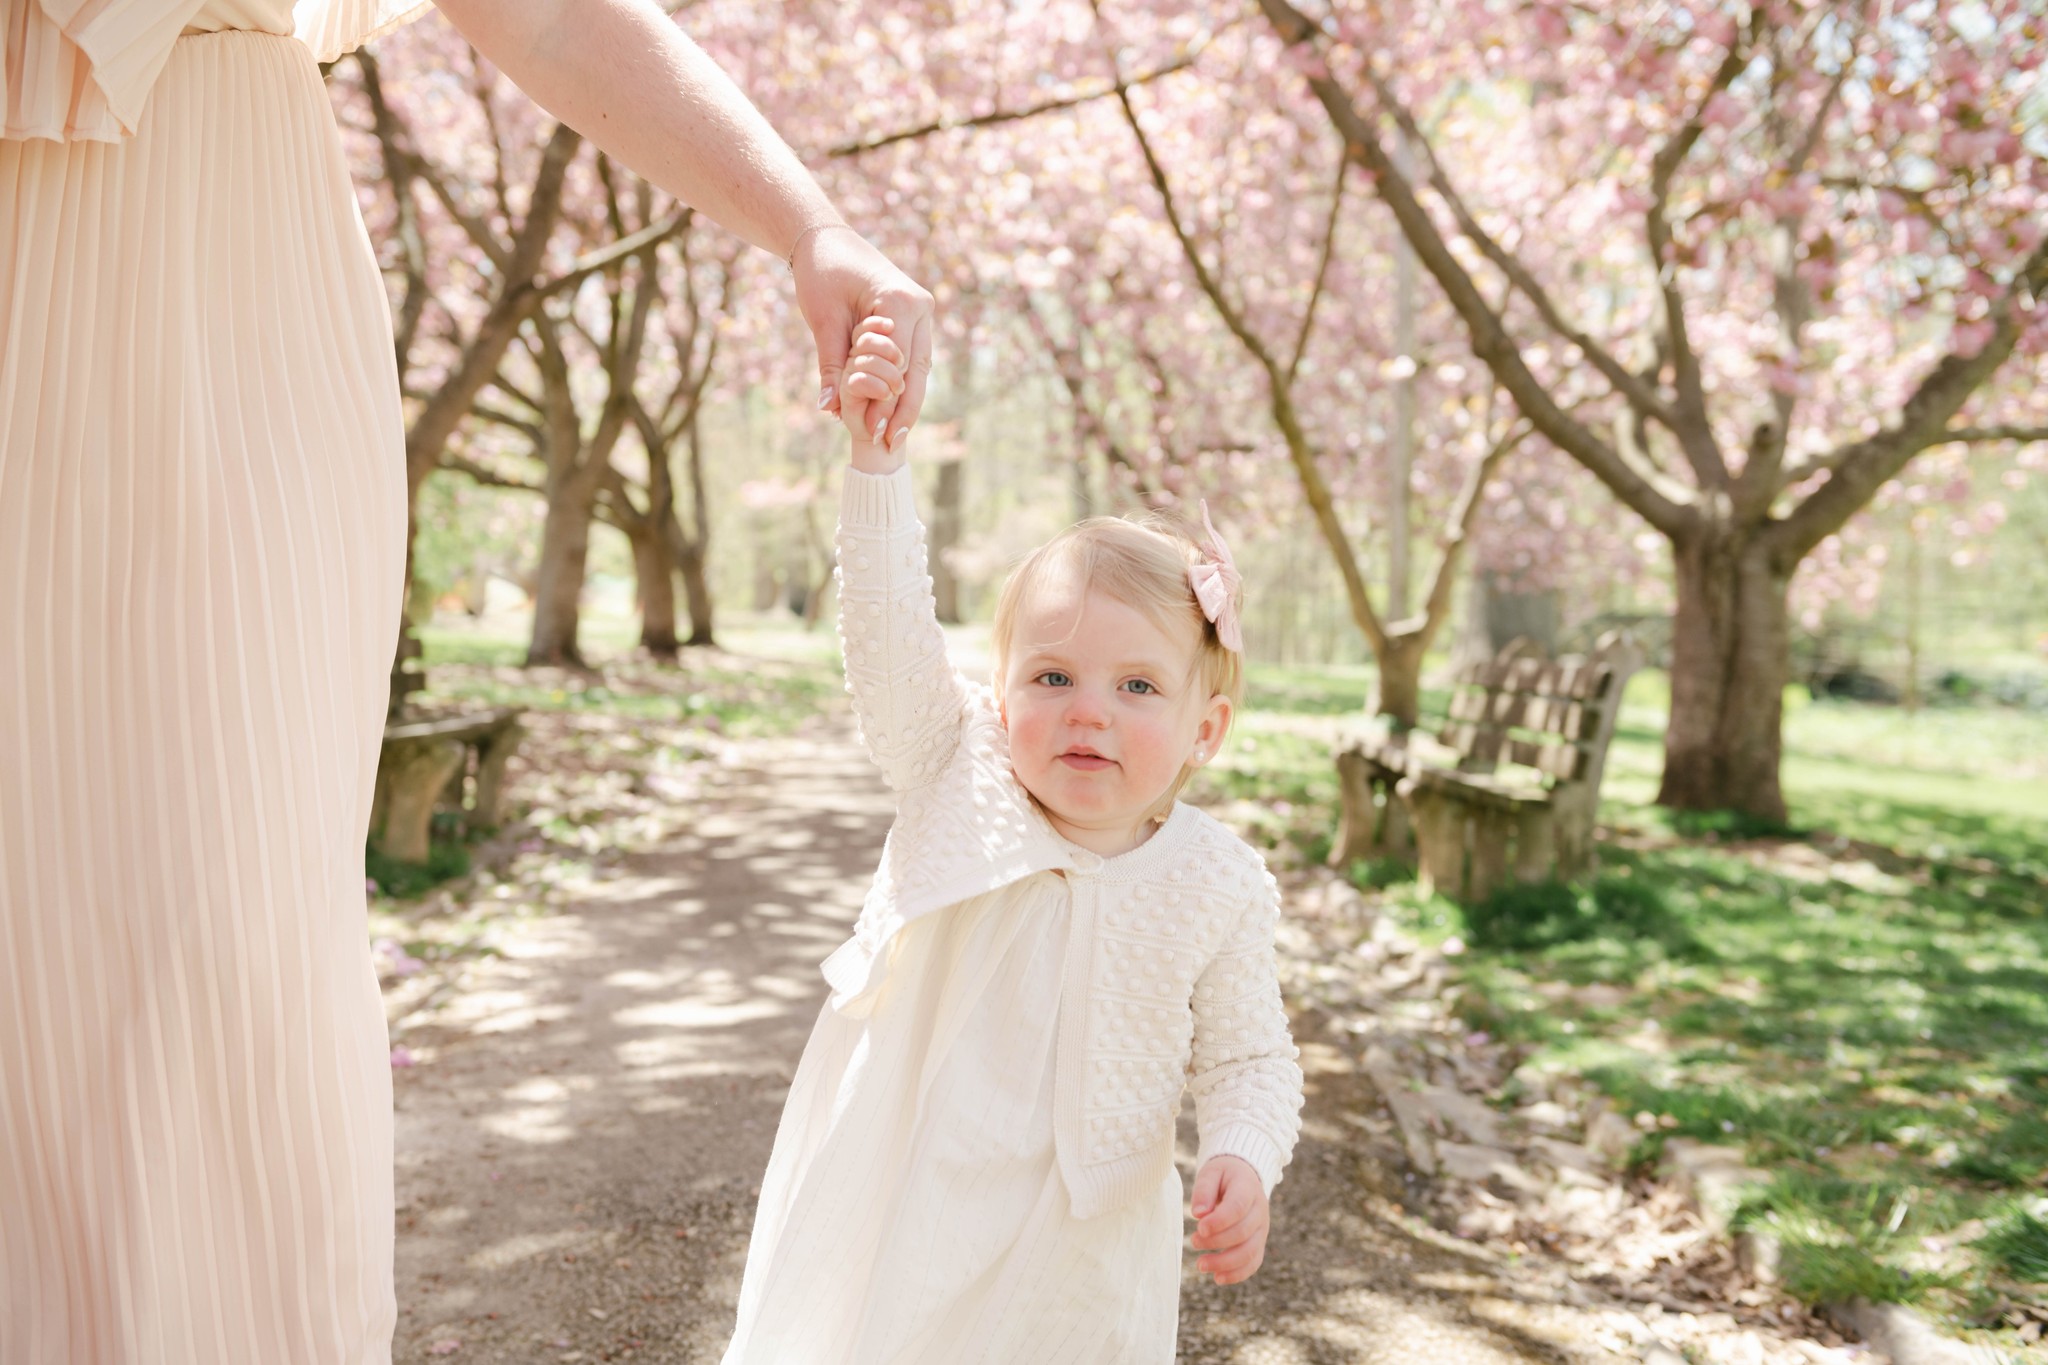 A young girl in a white dress and sweater walks while holding her mom's hand through a park h rose boutique